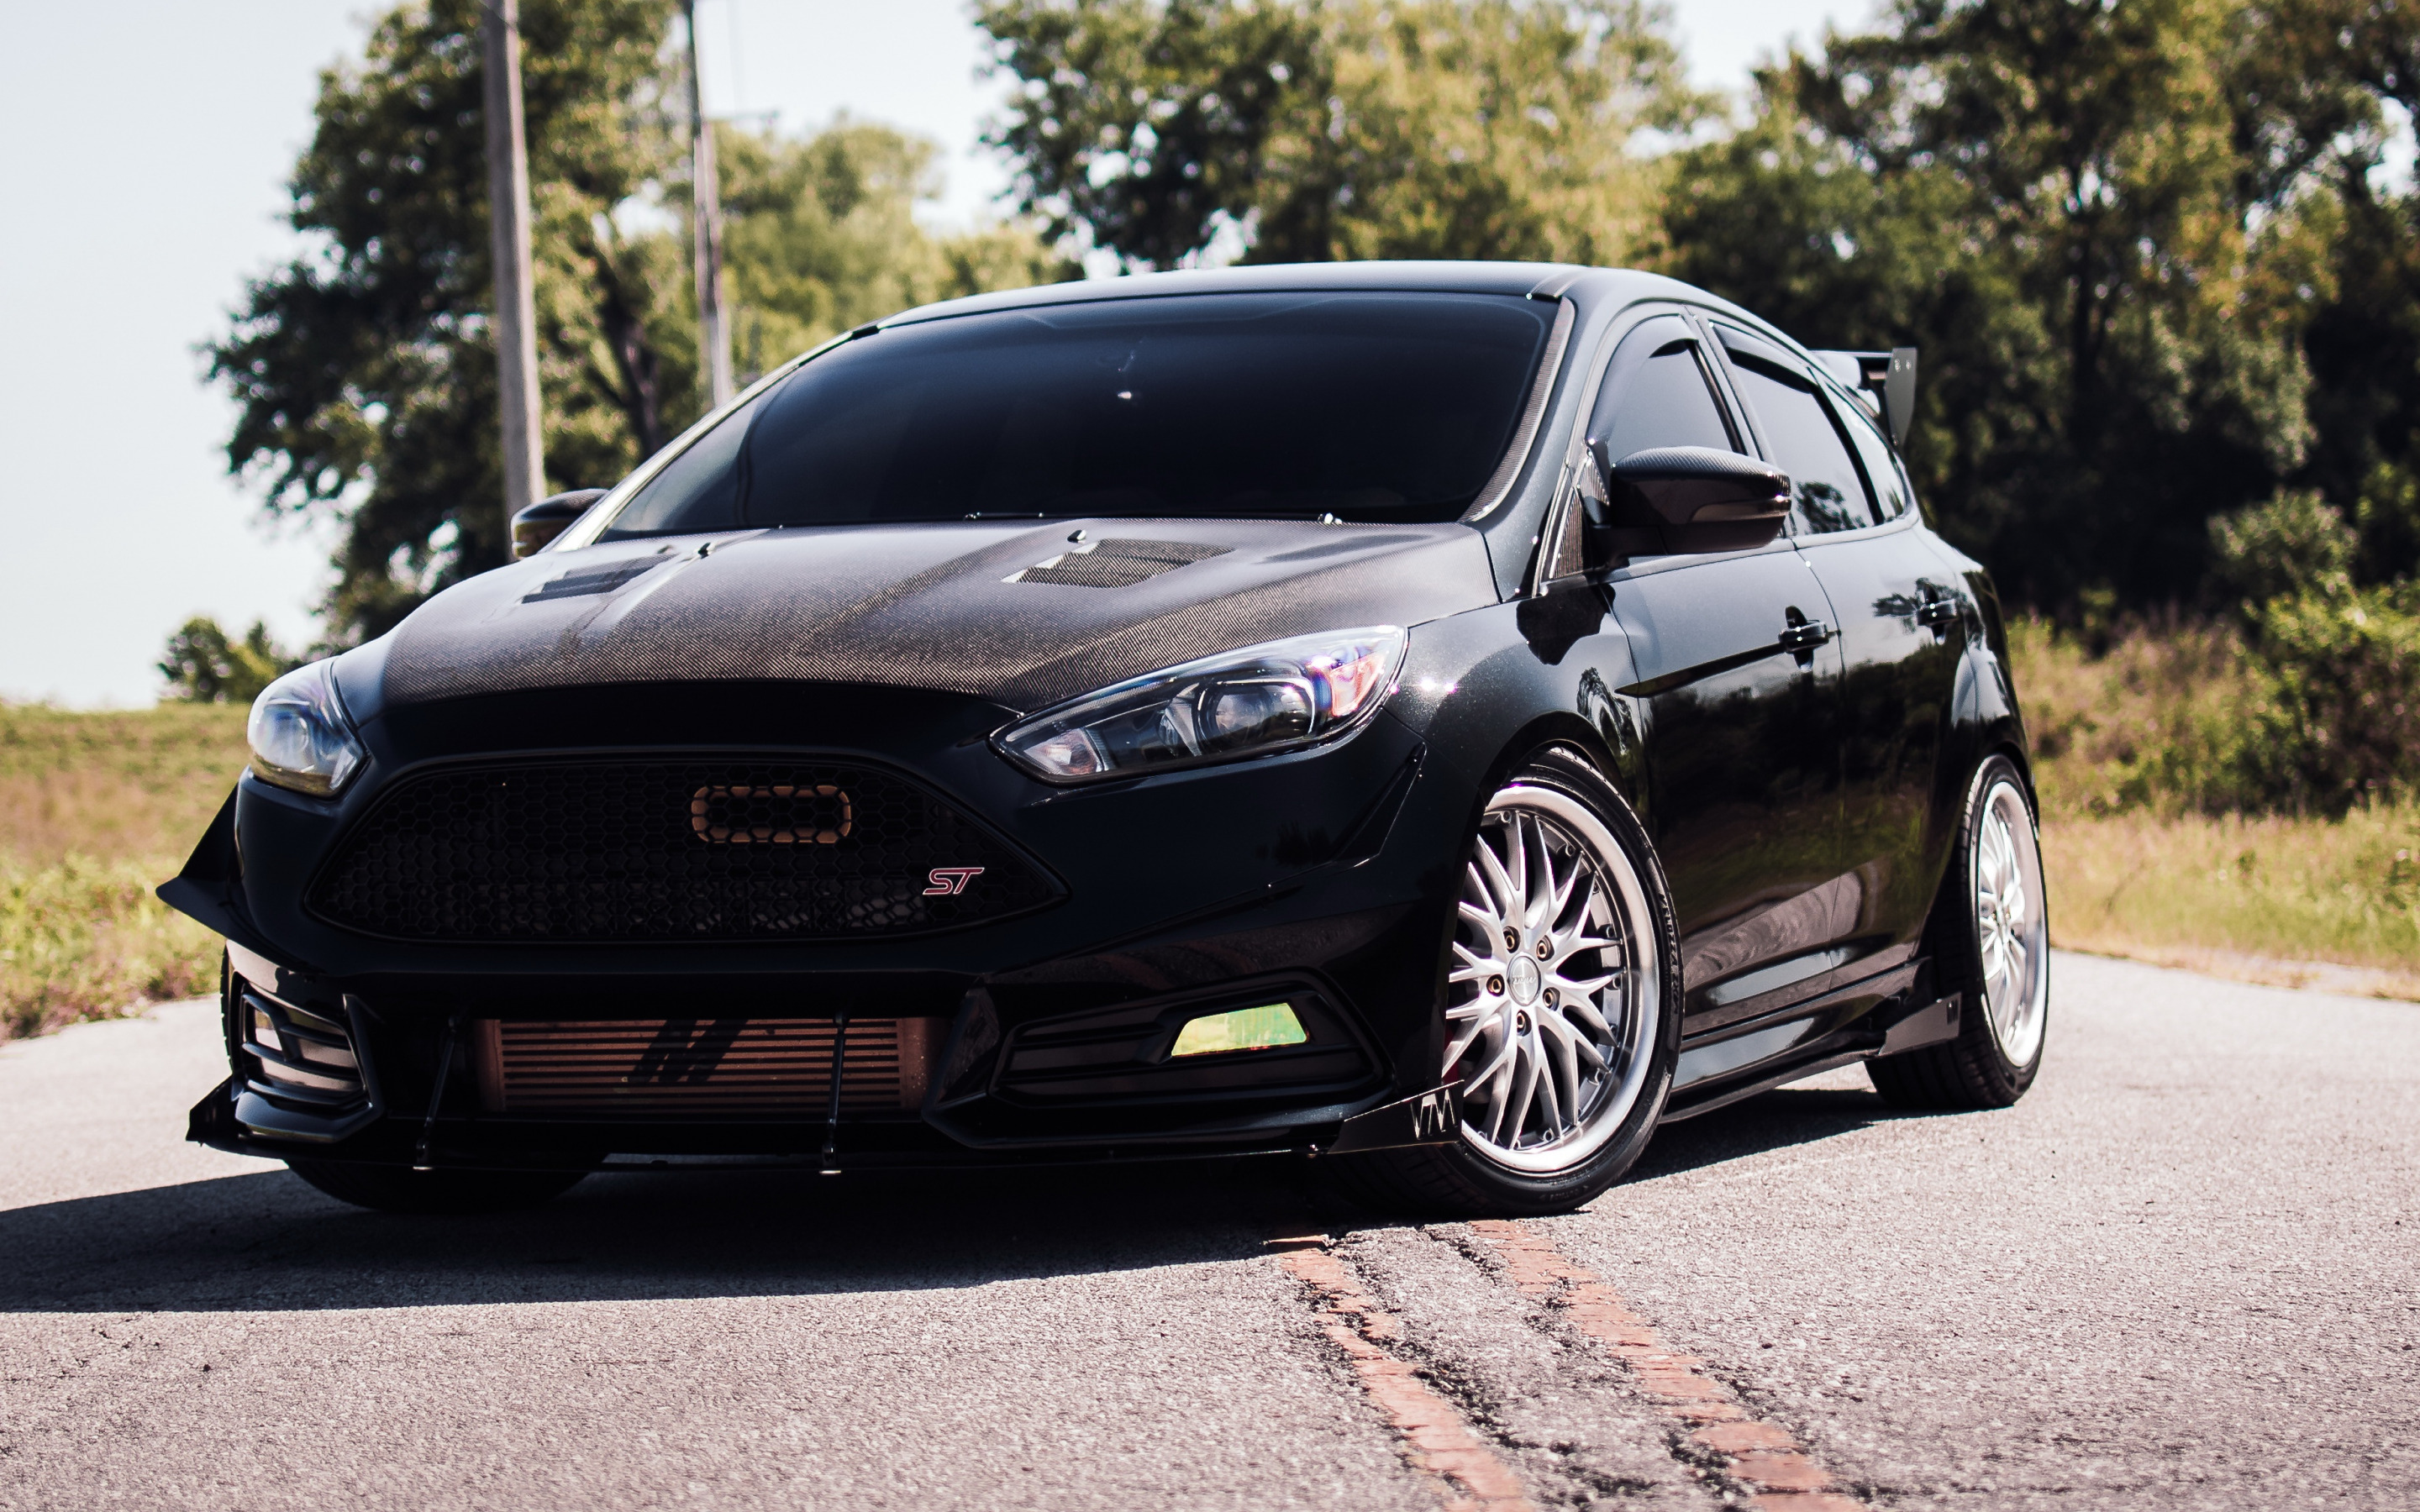 Ford Fiesta St, Black Hatchback, Tuning Fiesta, Carbon - Ford Fiesta 2018 Tuning , HD Wallpaper & Backgrounds